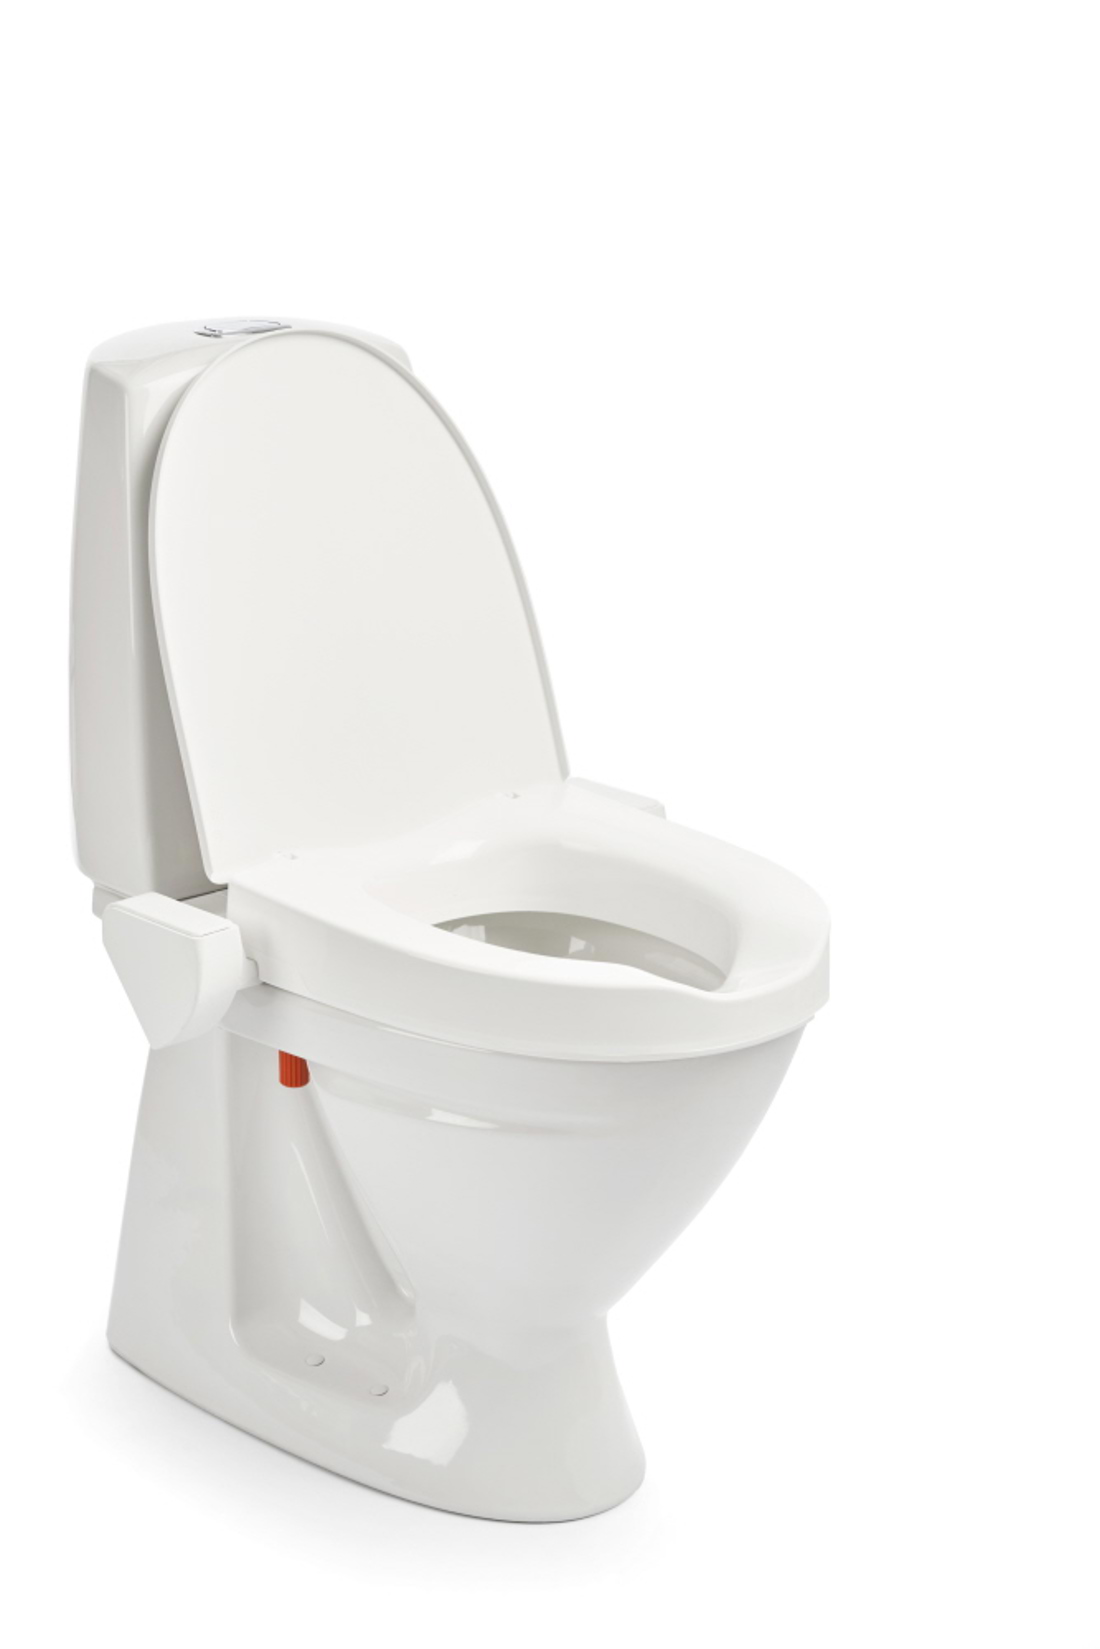 ETAC MYLOO FIXED 6CM WITHOUT ARMSUPPORT OPEN.jpg